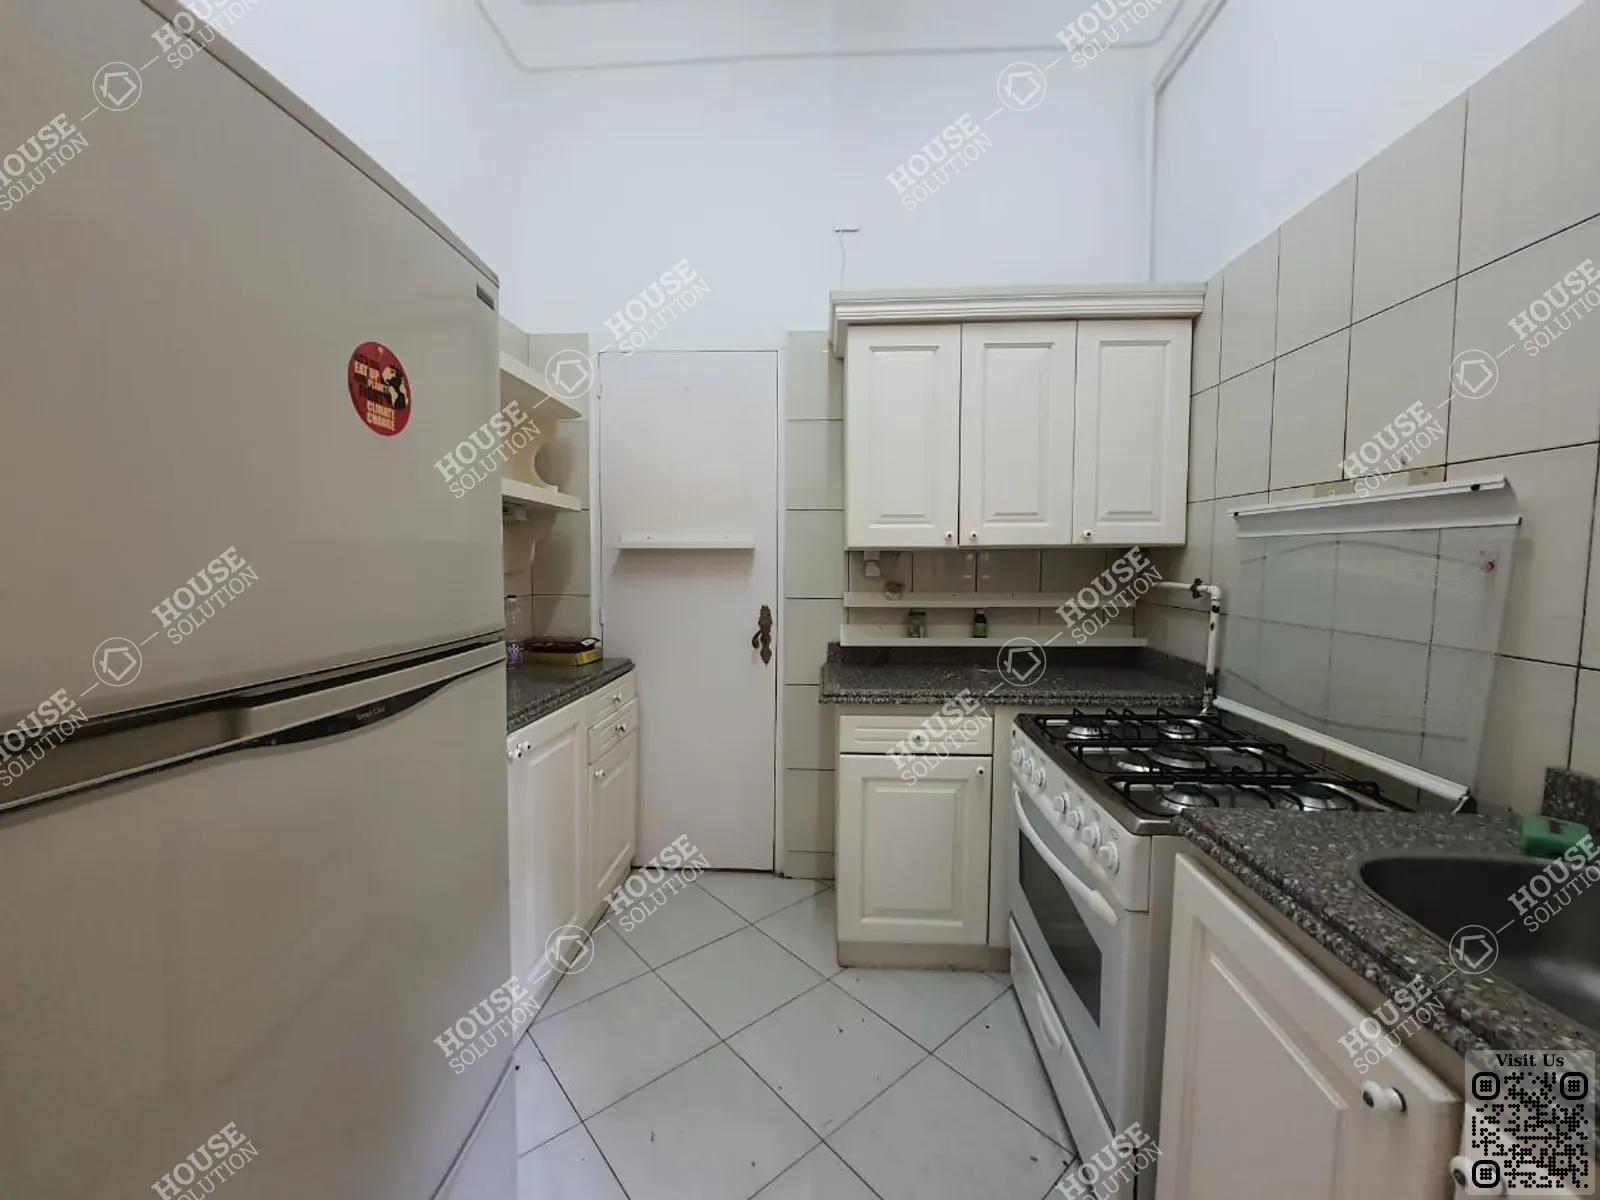 KITCHEN  @ Apartments For Rent In Maadi Maadi Sarayat Area: 200 m² consists of 3 Bedrooms 2 Bathrooms Furnished 5 stars #5362-2